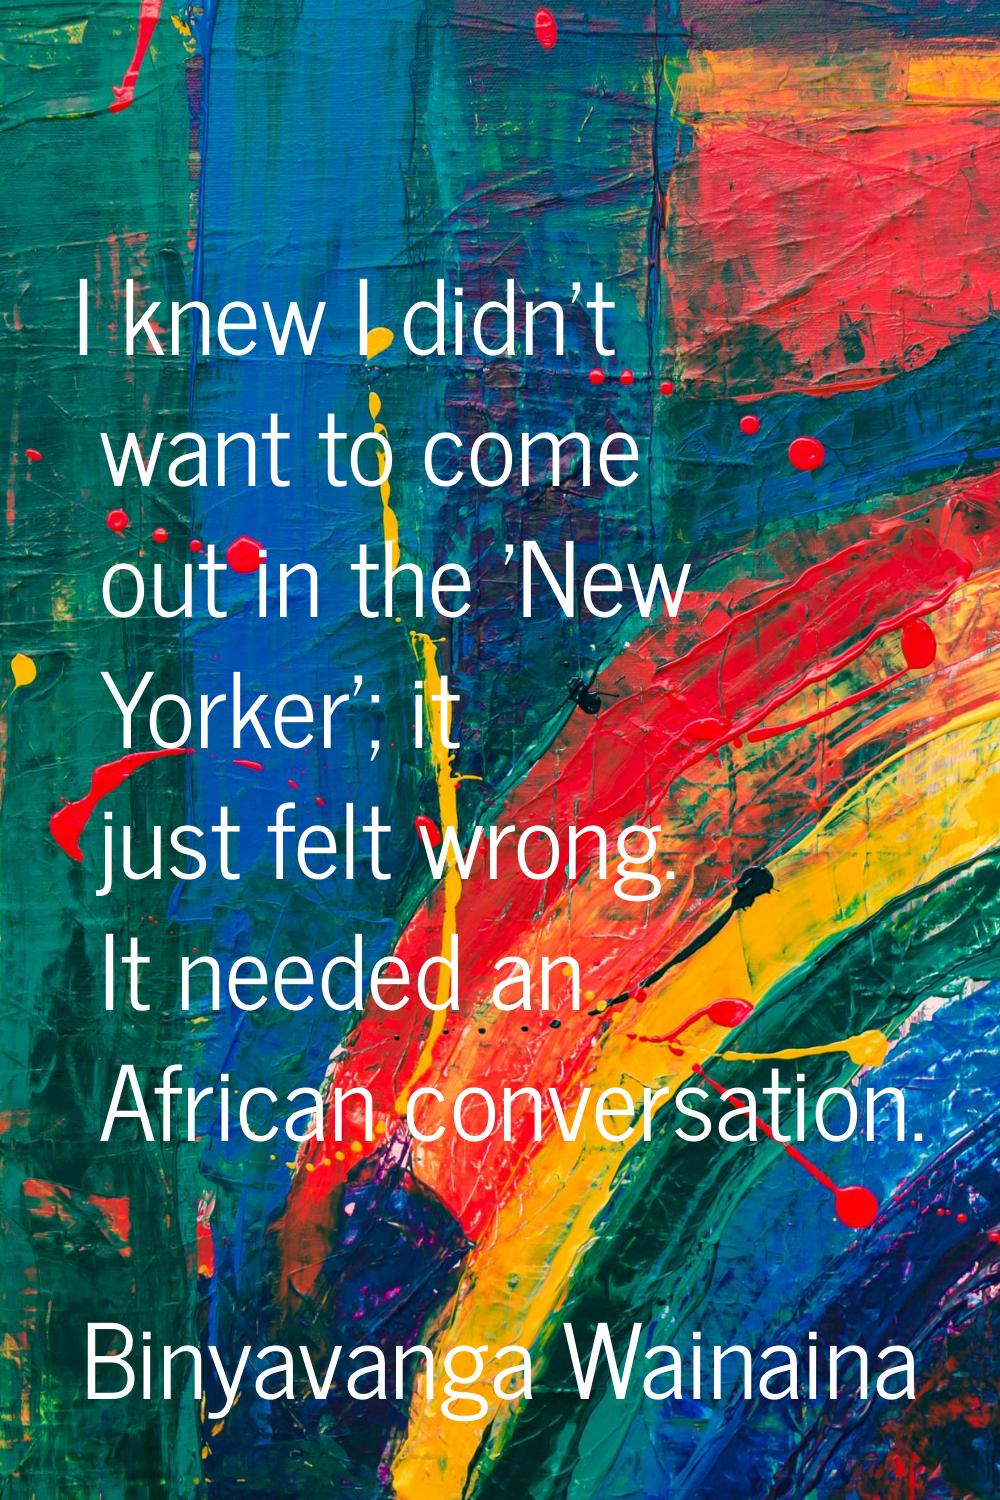 I knew I didn't want to come out in the 'New Yorker'; it just felt wrong. It needed an African conv